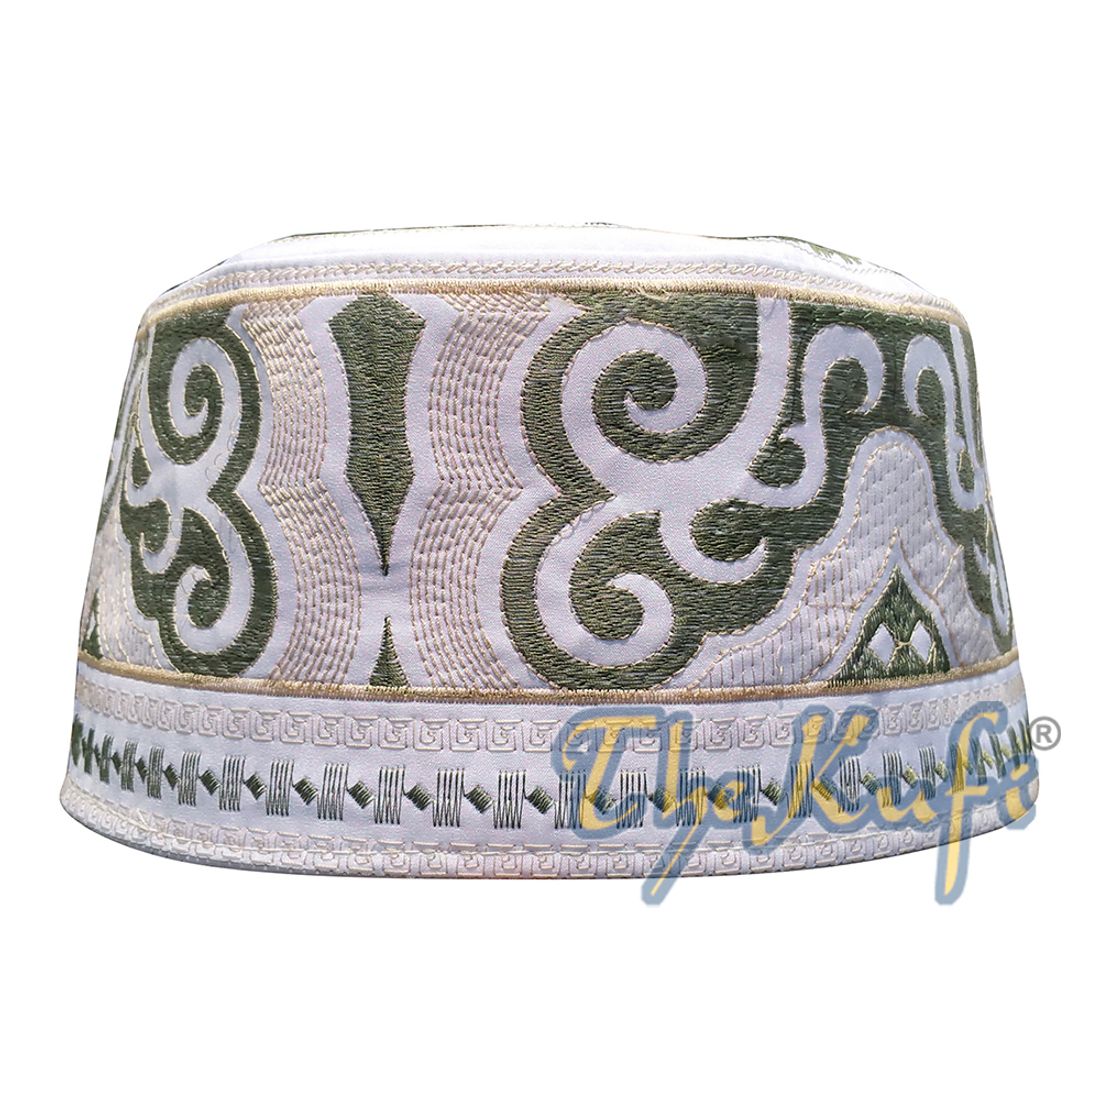 Omani Islamic Embroidered Kufi Hat White Base with Olive Green Cream Embroidery